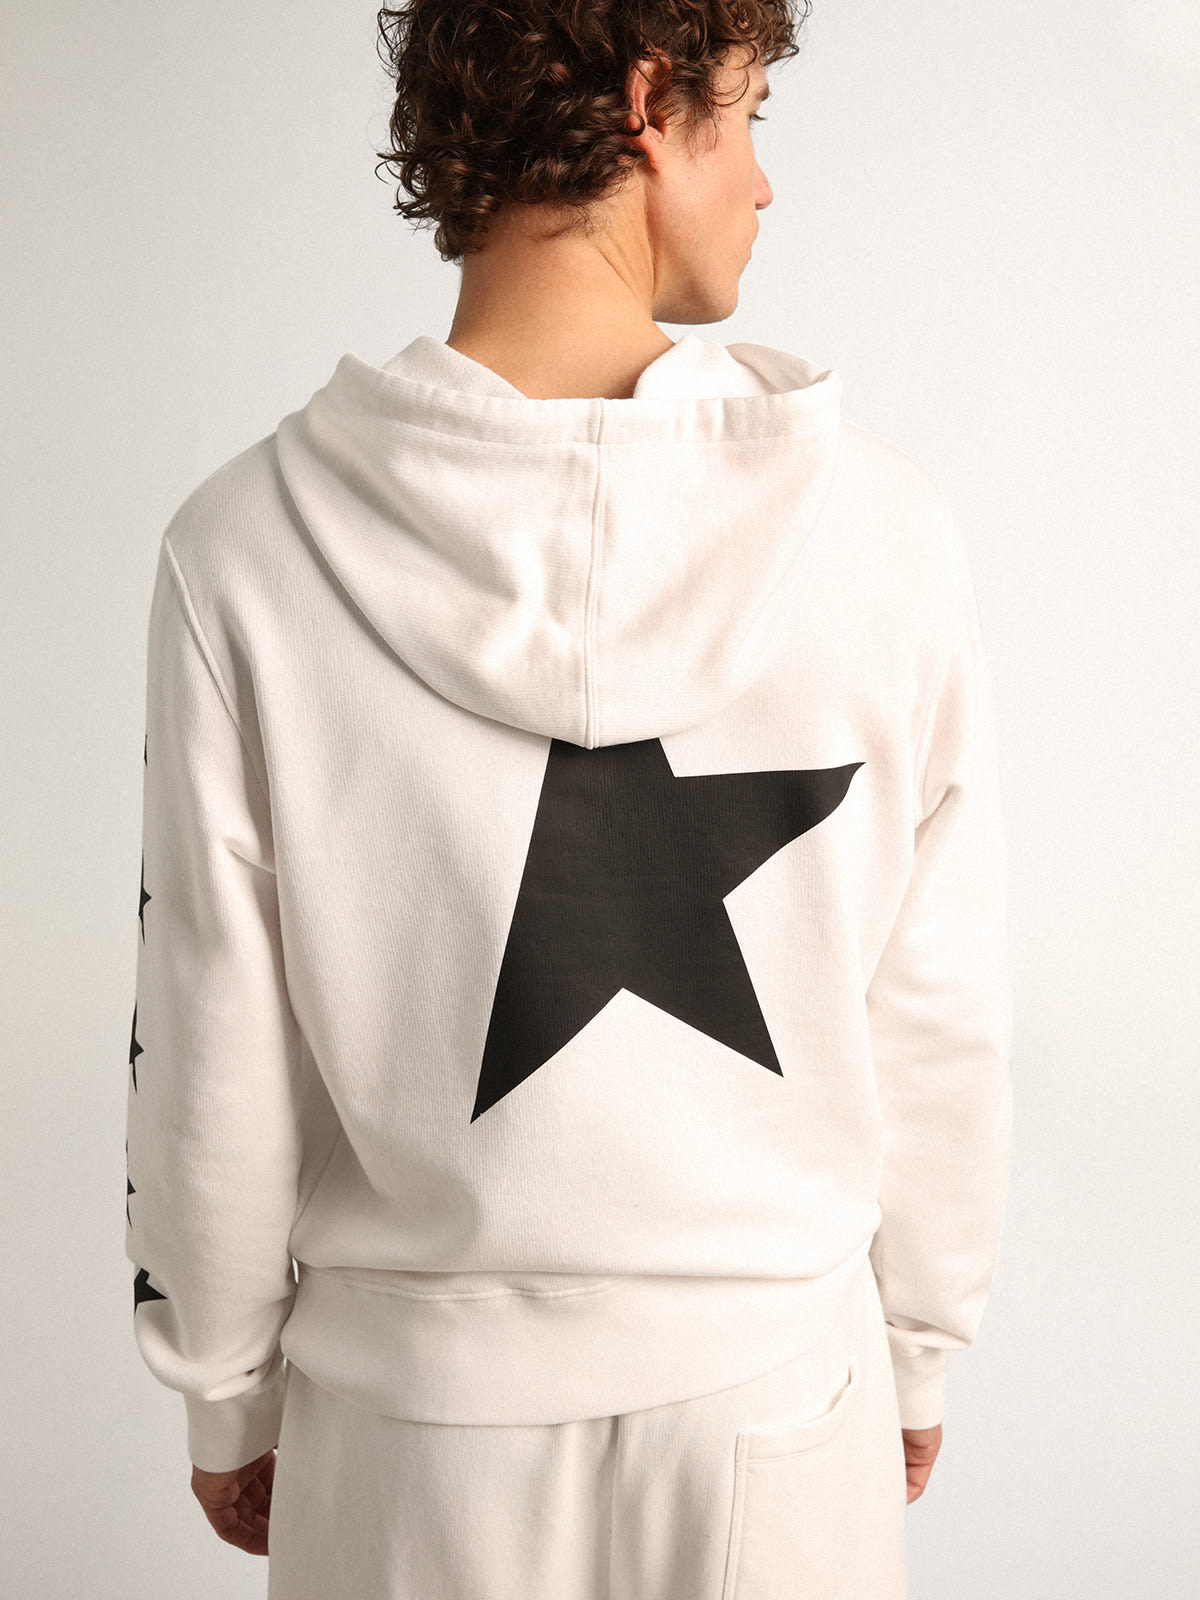 Alighiero Star Collection hooded sweatshirt in vintage white with